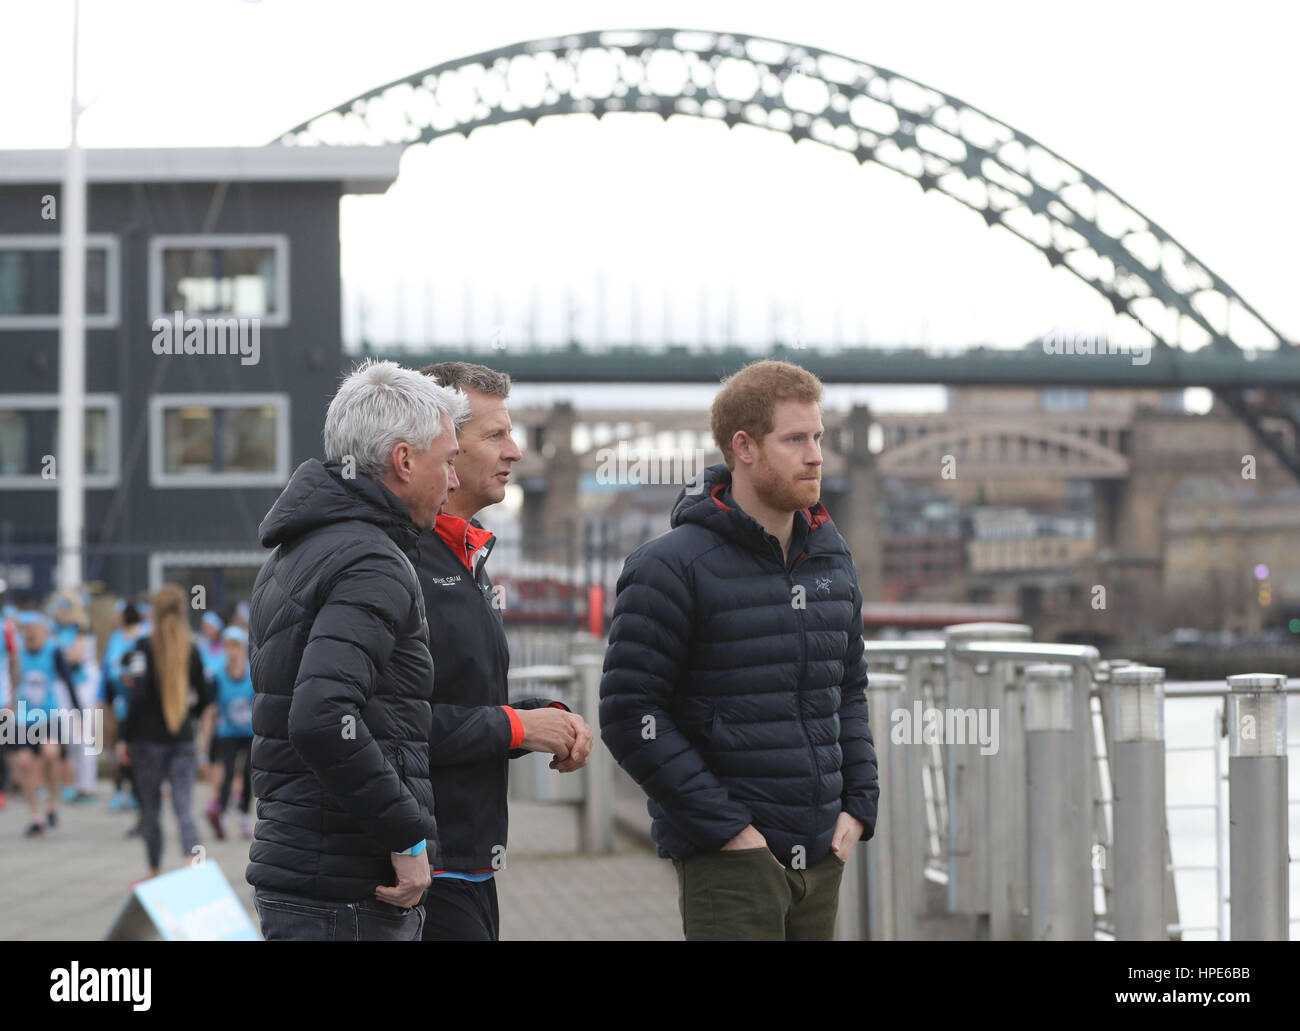 GENERIC CAPTION Prince Harry arriving at the Quayside in Gateshead where he will team up with Steve Cram and Jonathan Edwards as they train runners taking part in the London Marathon for mental health charity Heads Together. Stock Photo